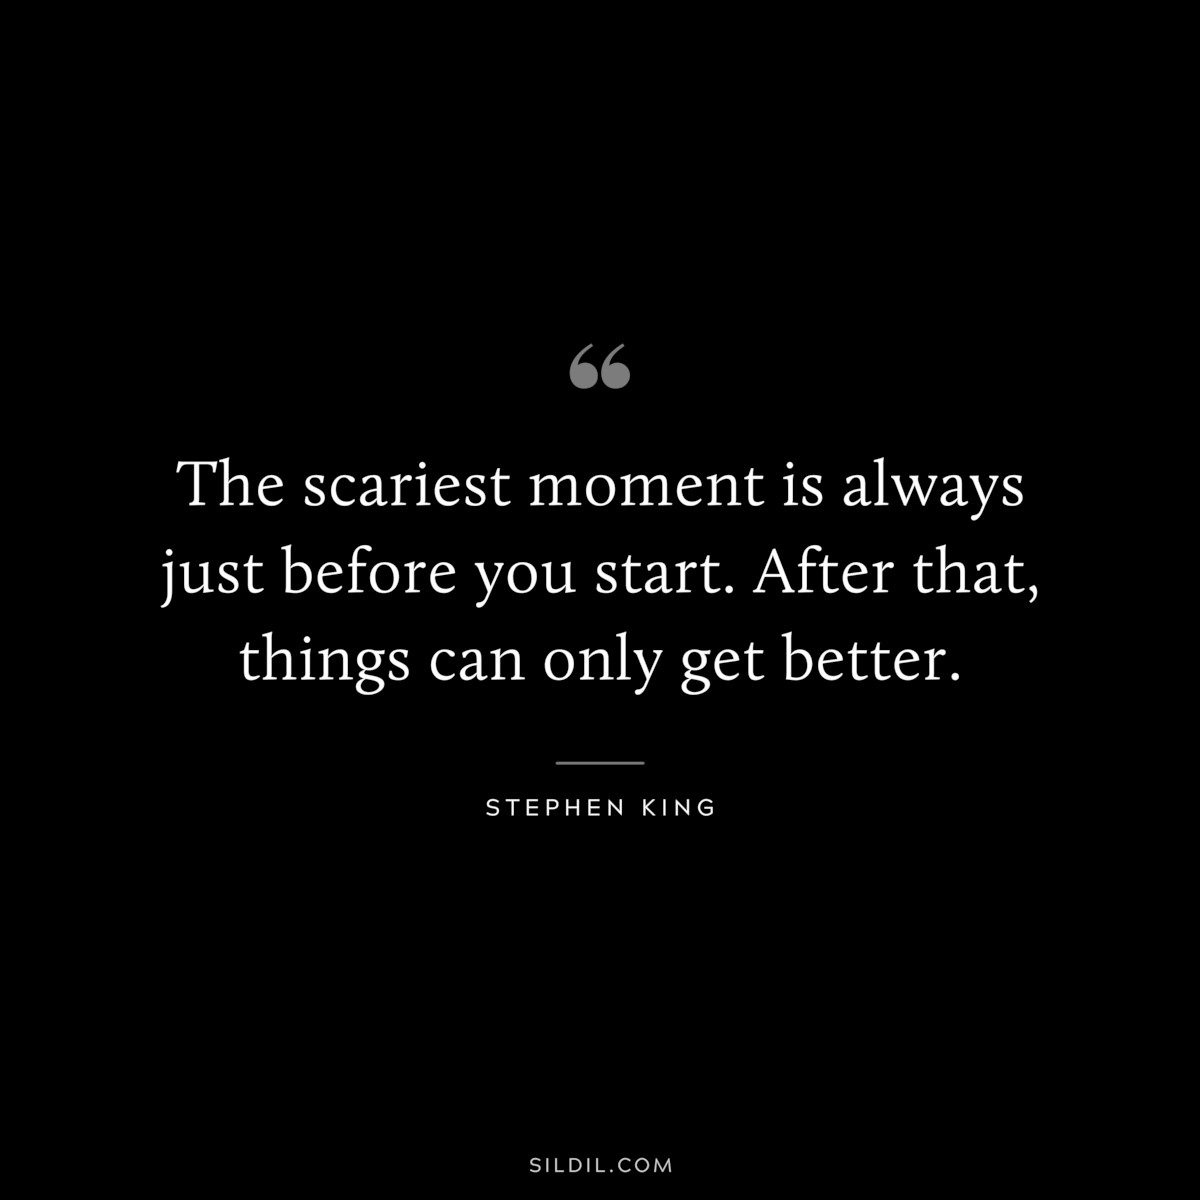 The scariest moment is always just before you start. After that, things can only get better. ― Stephen King